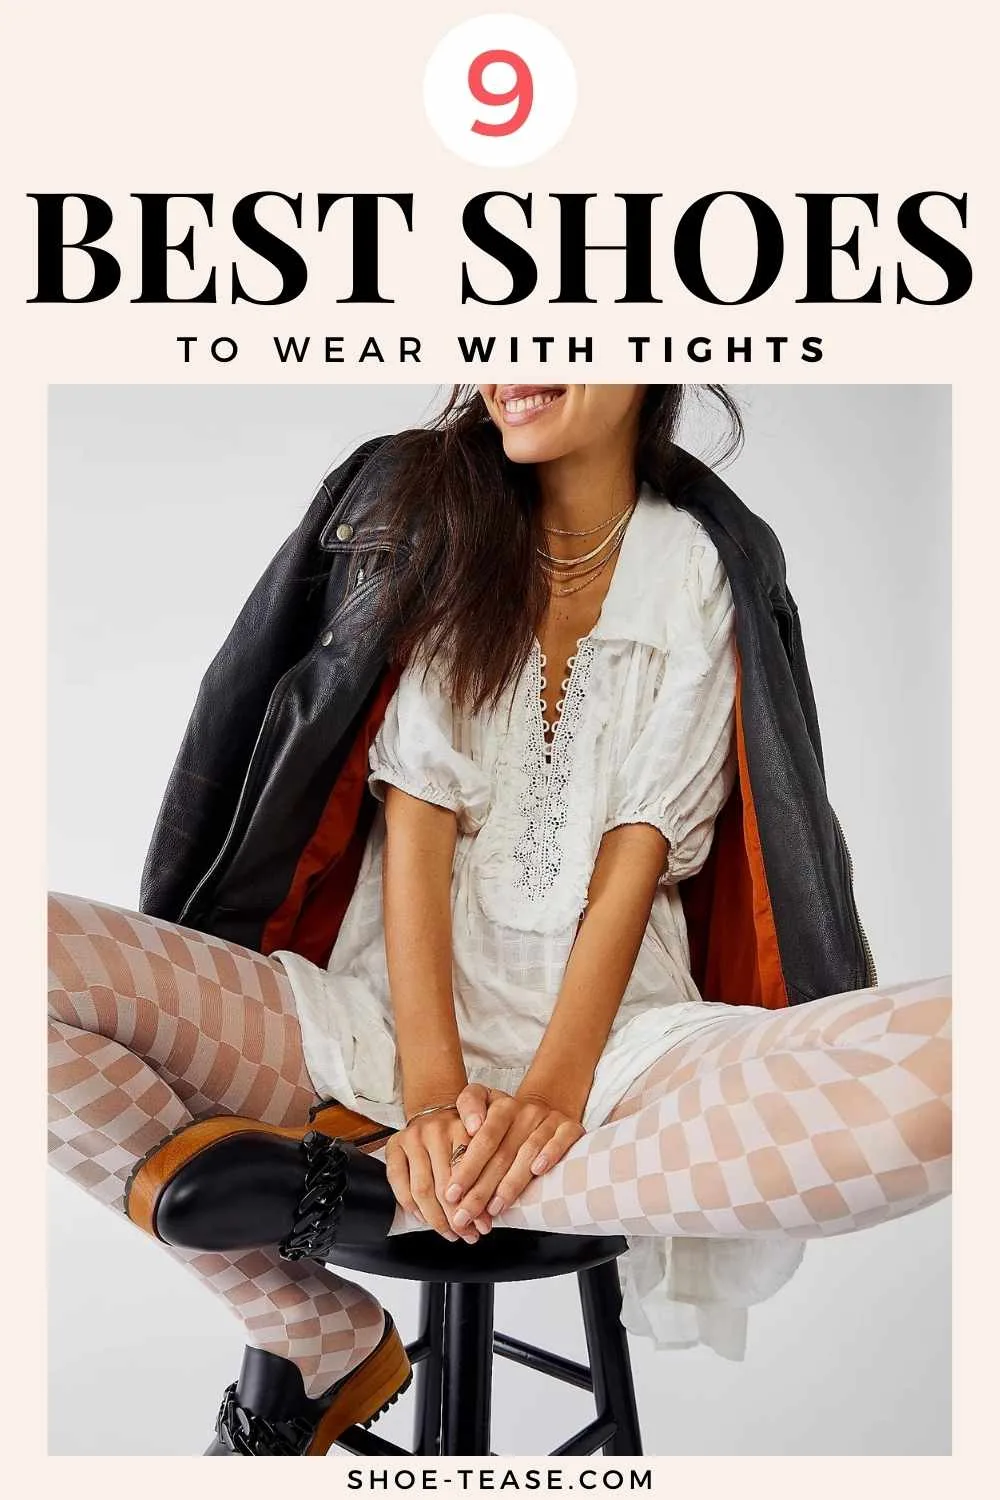 Text reading 9 best shoes to wear with tights collage with woman sitting on bench in white dress black moto jacket loafer shoes with checkered tights.